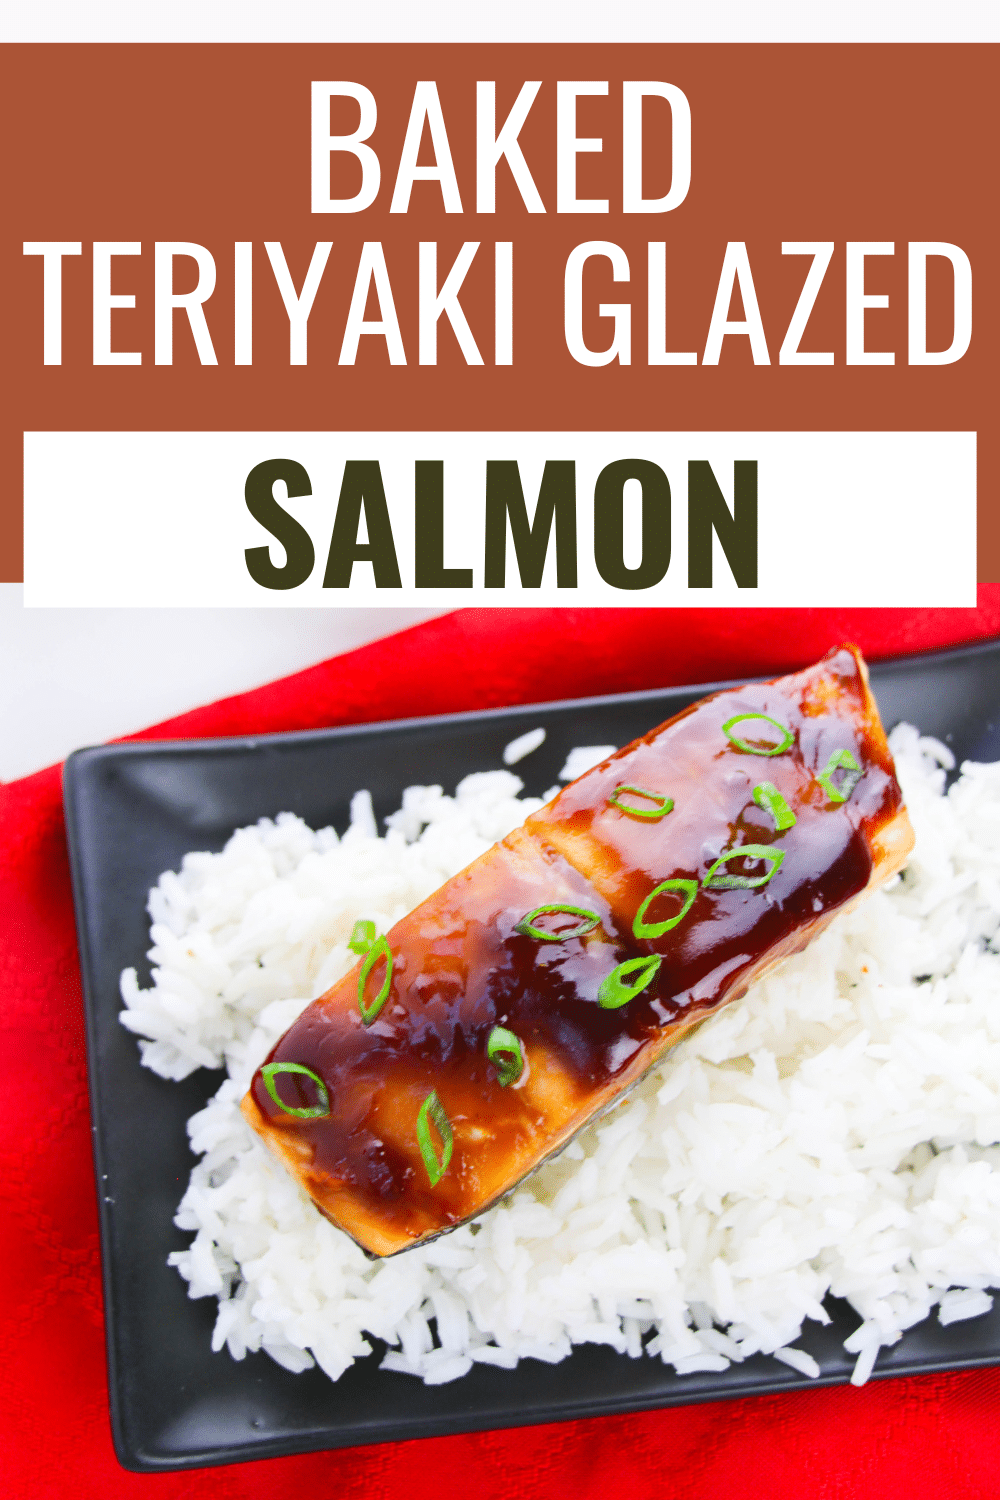 This Teriyaki Glazed Salmon is a quick and easy dinner that’s loaded with flavor. It is a healthy and tasty family friendly meal. #teriyakiglazedsalmon #teriyaki #salmon #familyfriendlymeal via @wondermomwannab